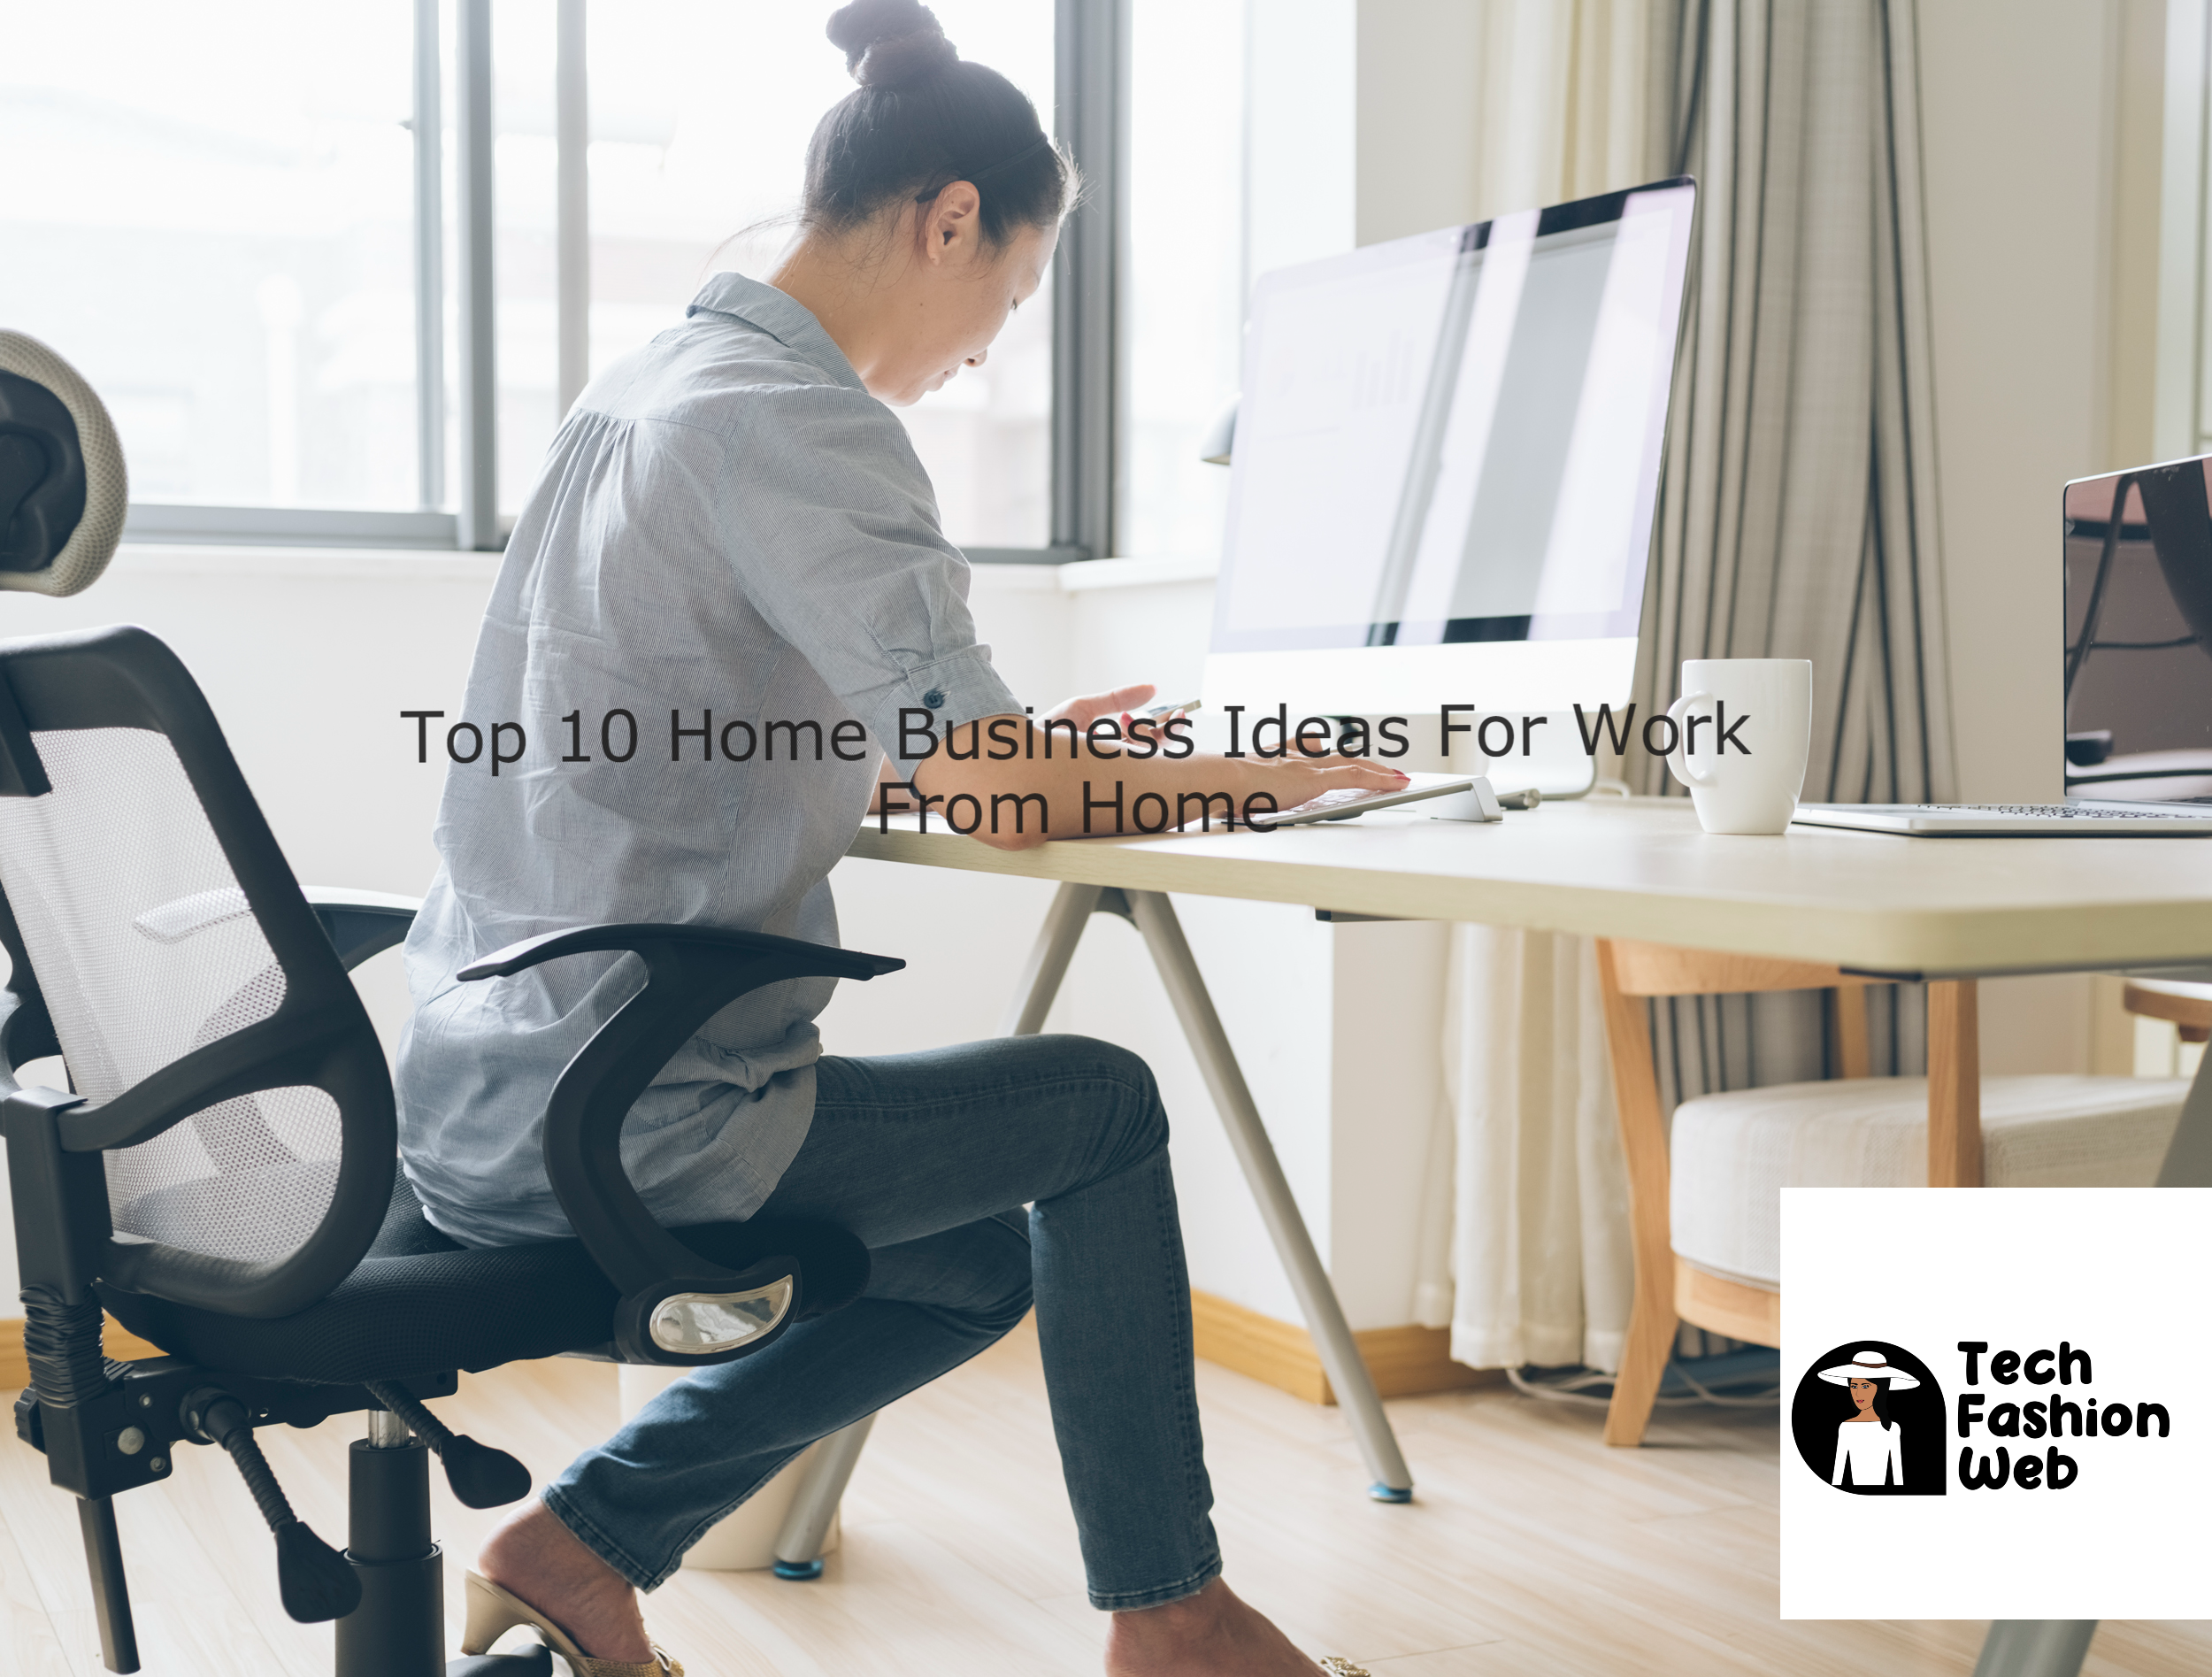 Business Ideas For Work From Home